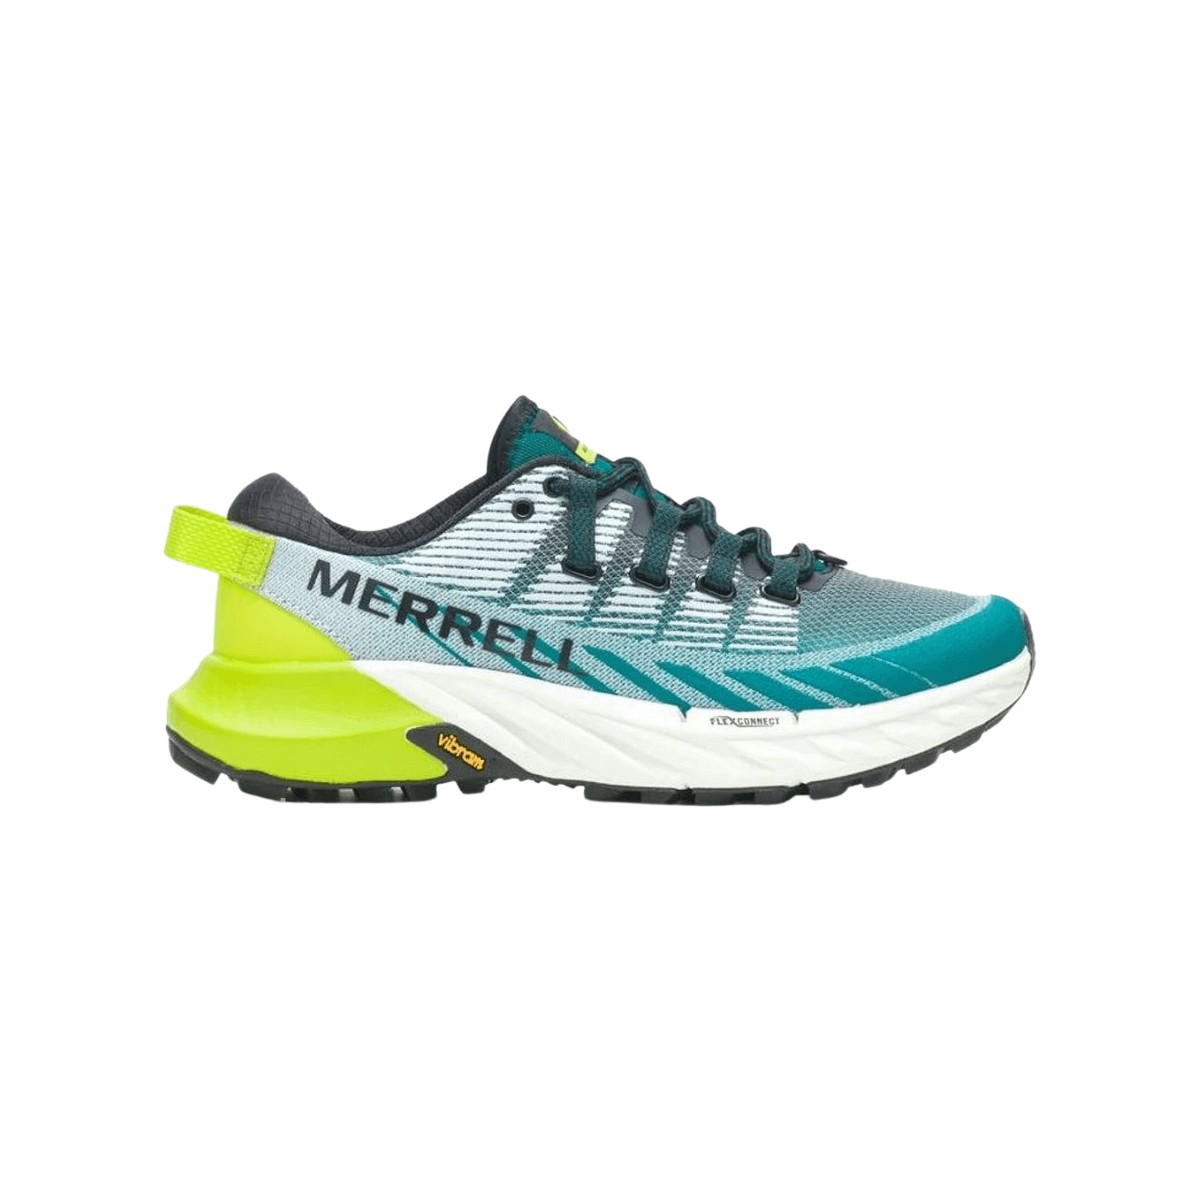 Chaussures Merrell Agility Peak 4 Vert Turquoise AW22 Femme, Taille 38,5 - EUR